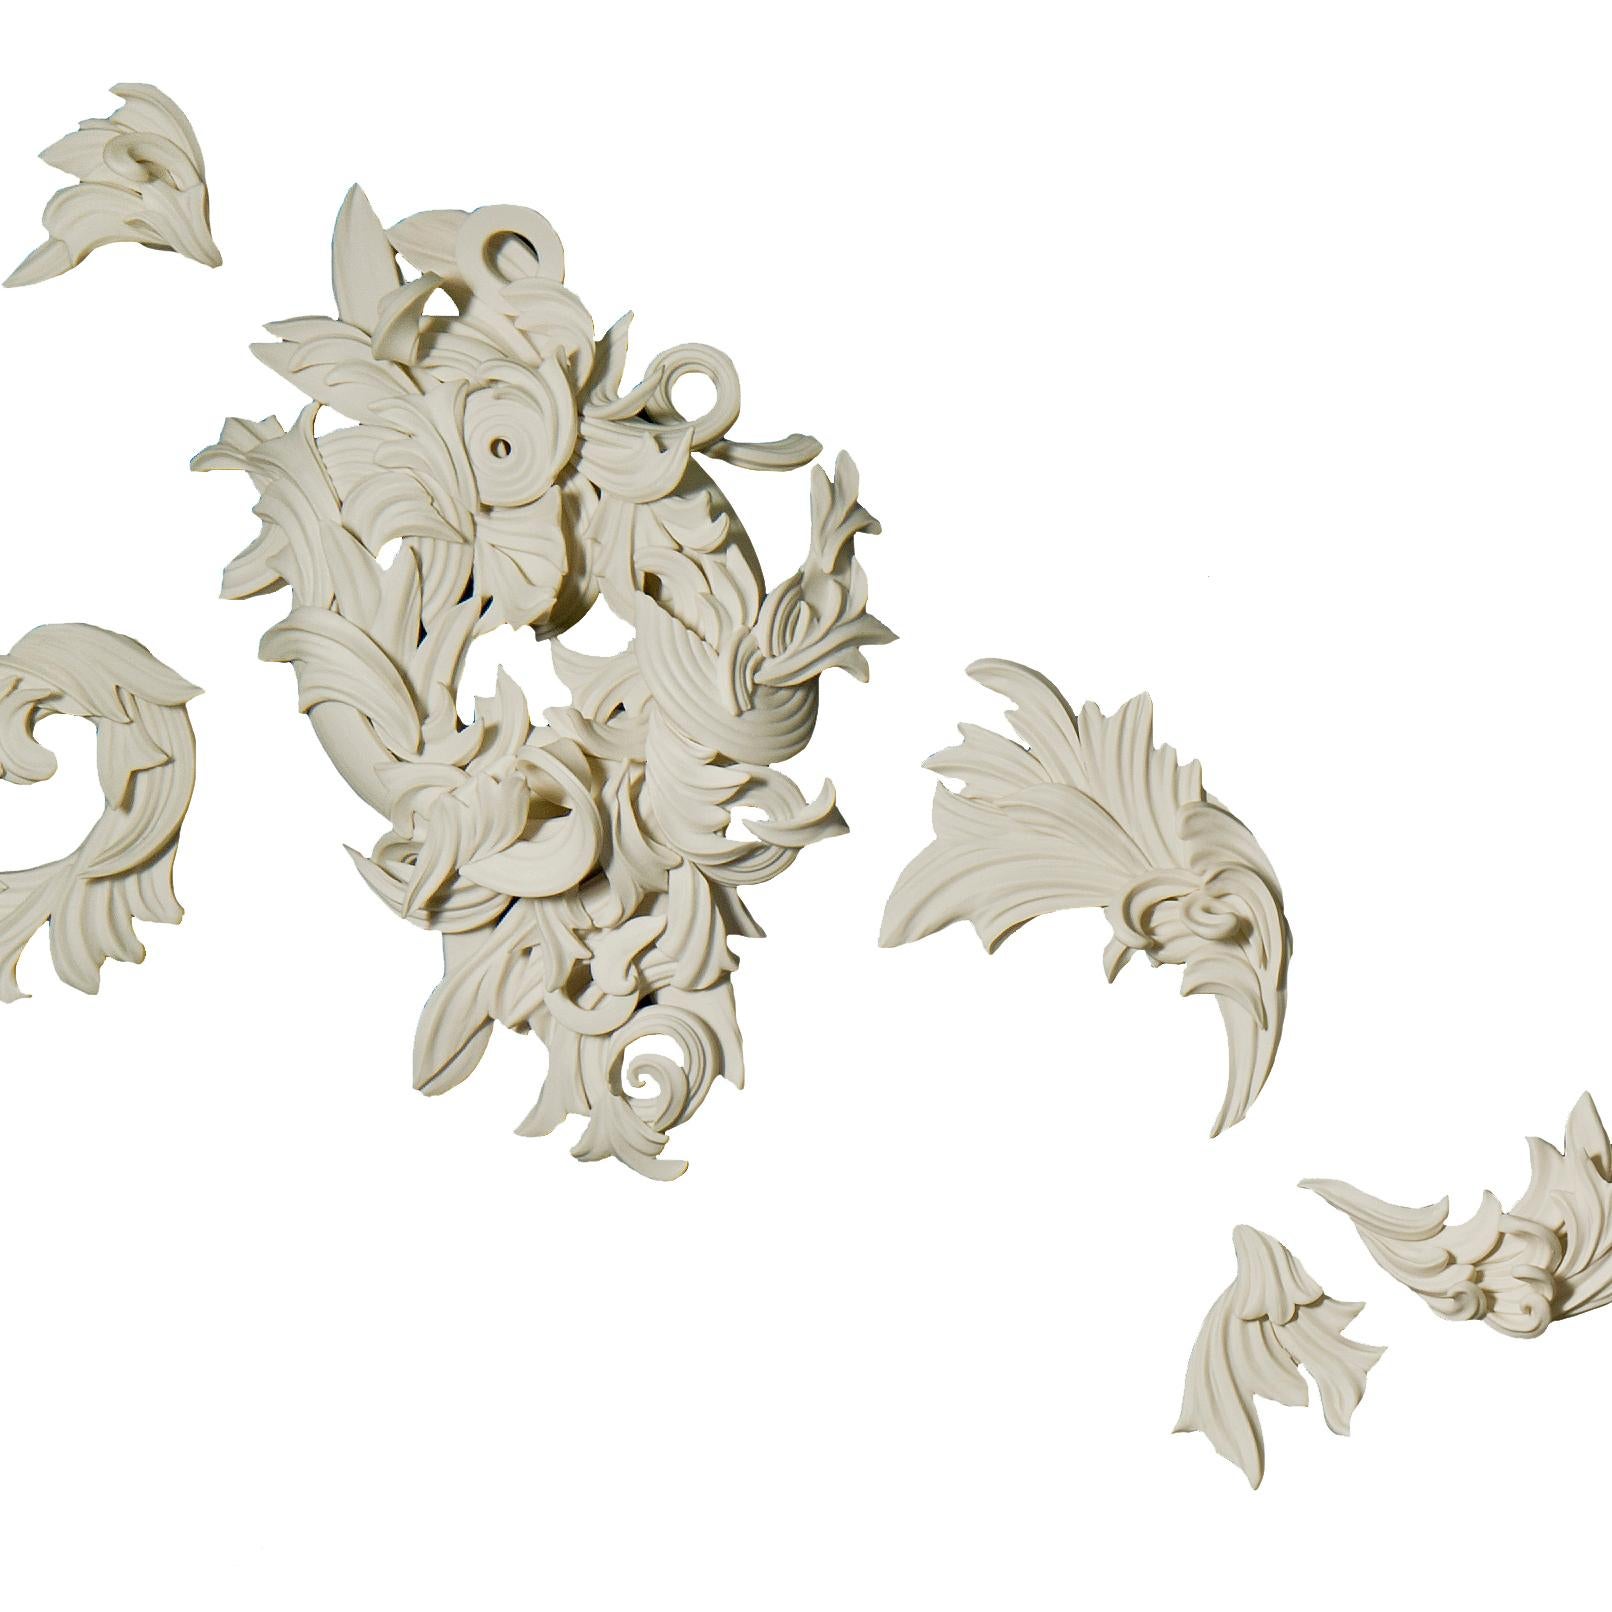 Cincture, is a unique handmade porcelain ceramic architectural wall installation by the British artist Jo Taylor. A completely hand-built artwork created from architectural-inspired flourishes and swirls consisting of 12 separate unique components.